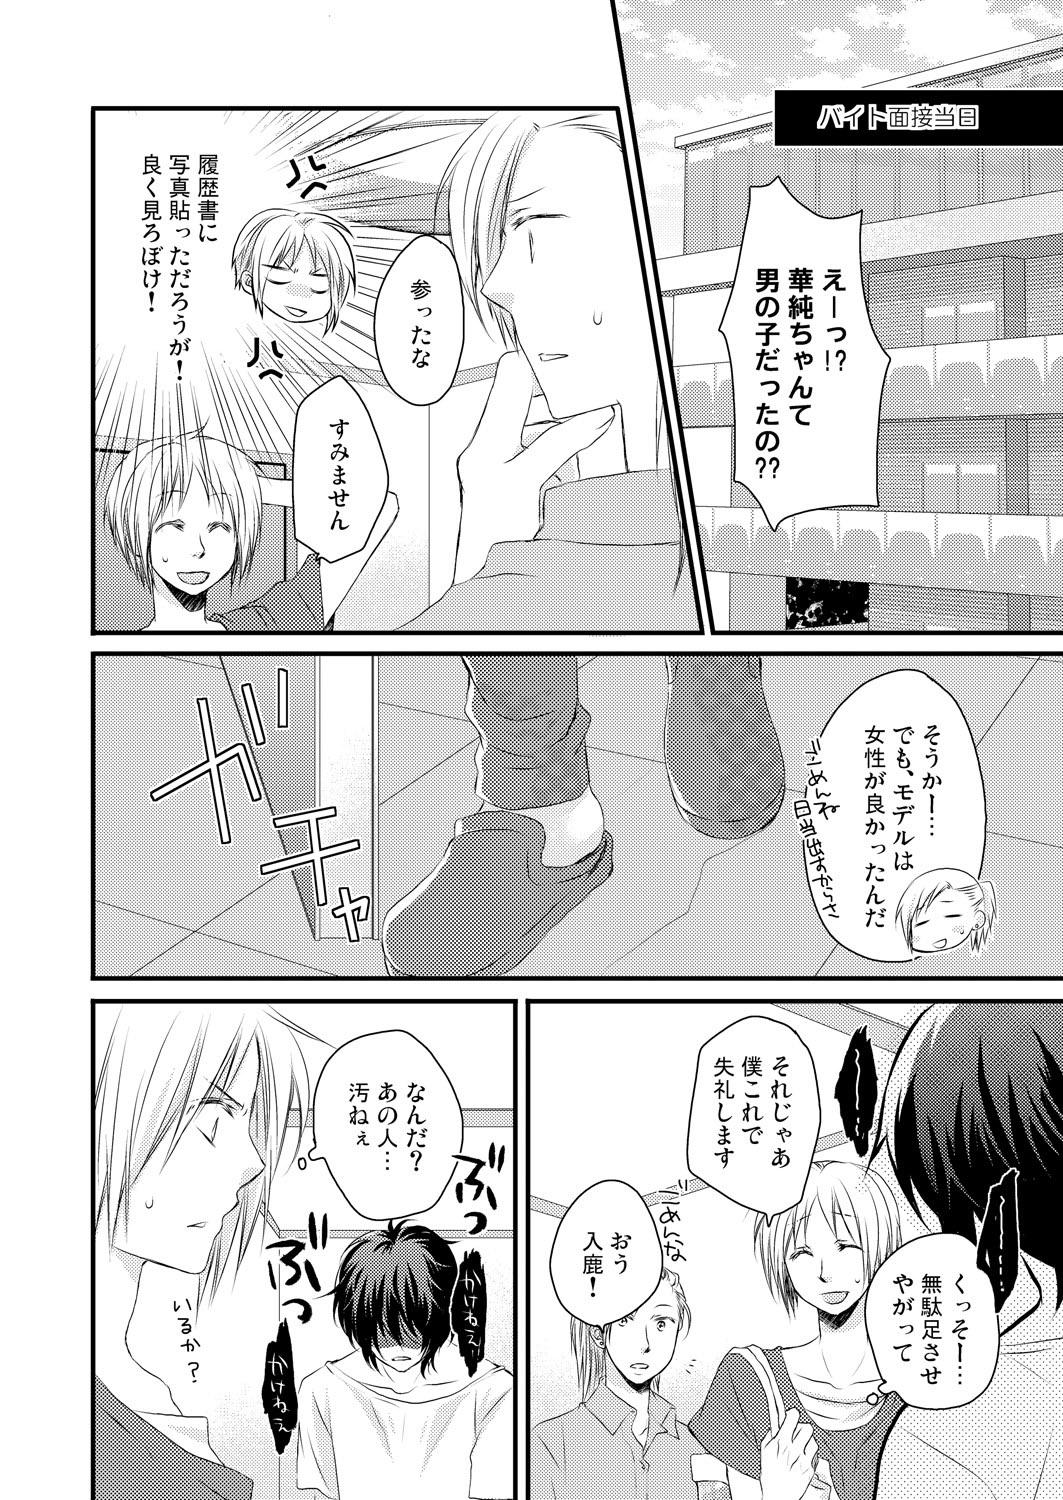 Bedroom 発情♂ゲイ術家～喘ぎアートはシモの筆で～ And - Page 8